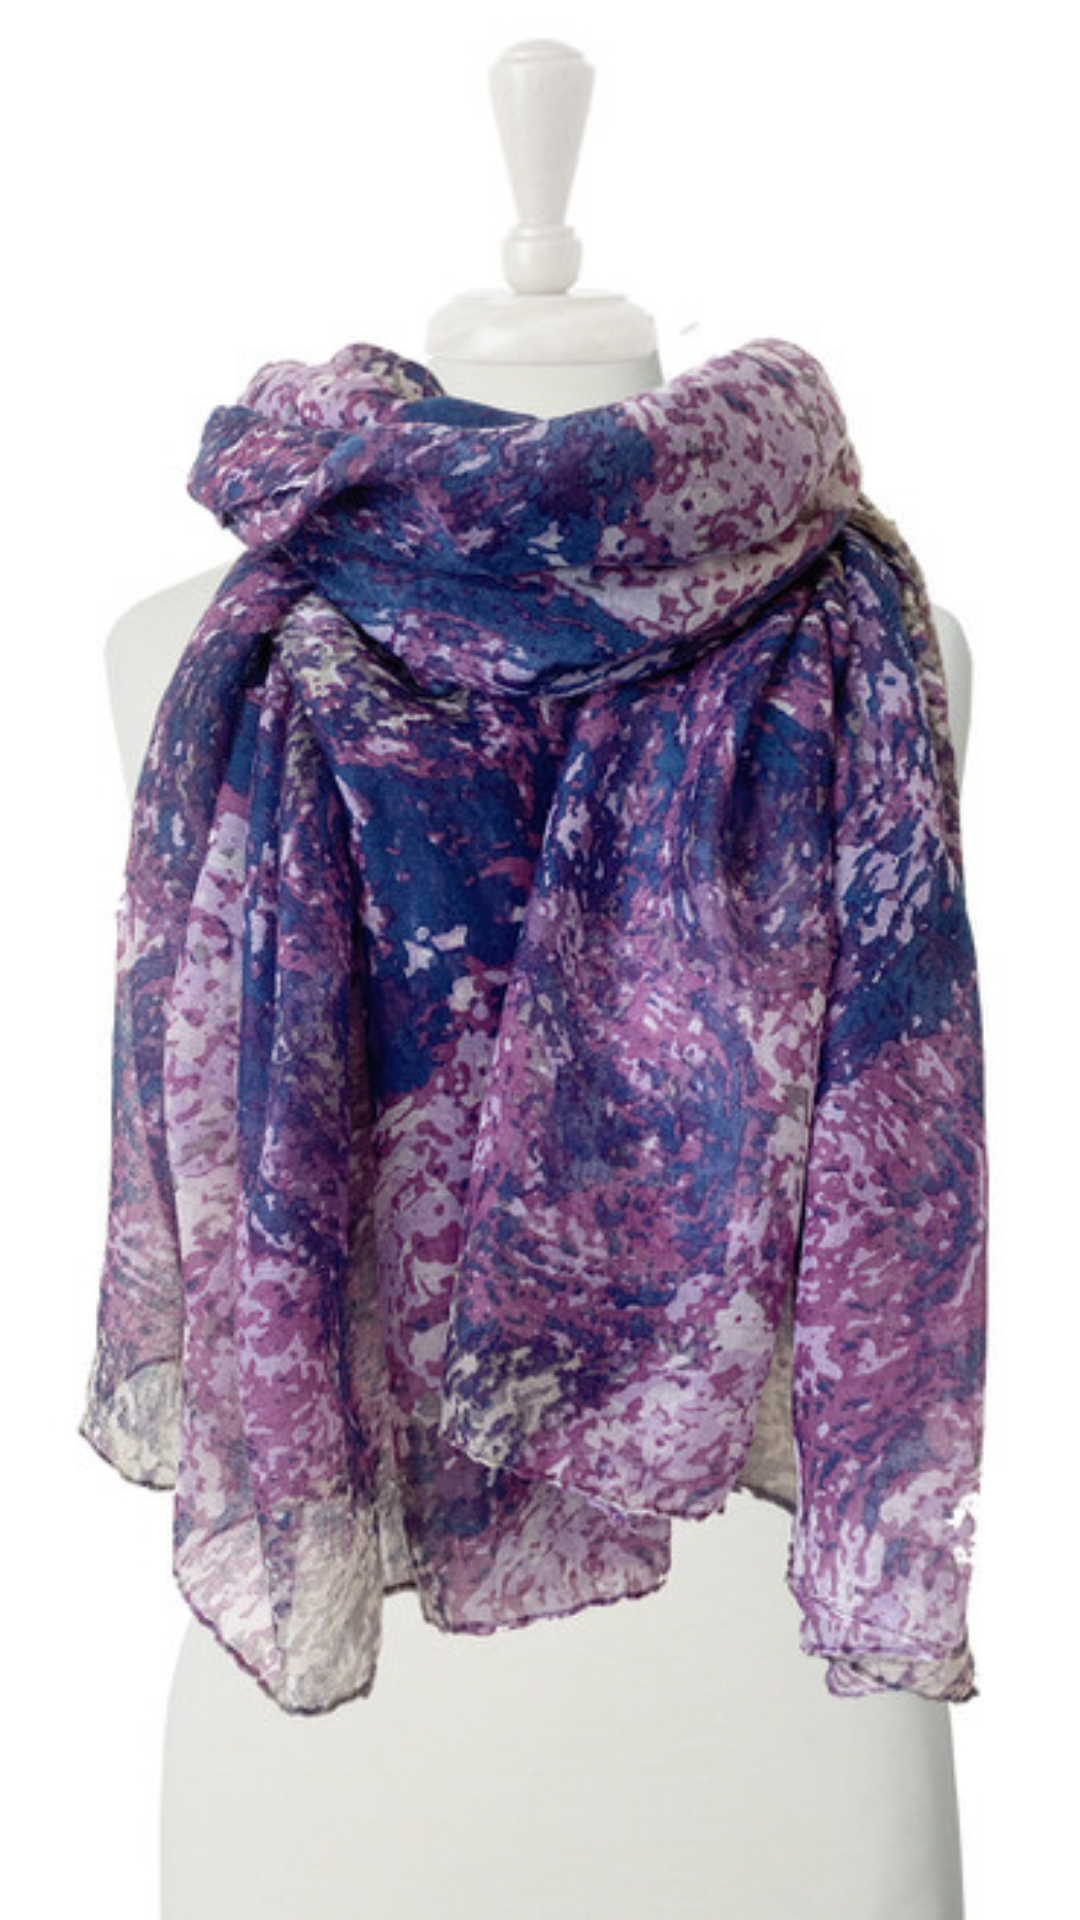 Foulard Scarf in Shades of Purple Print. Style CARA6141-PUR